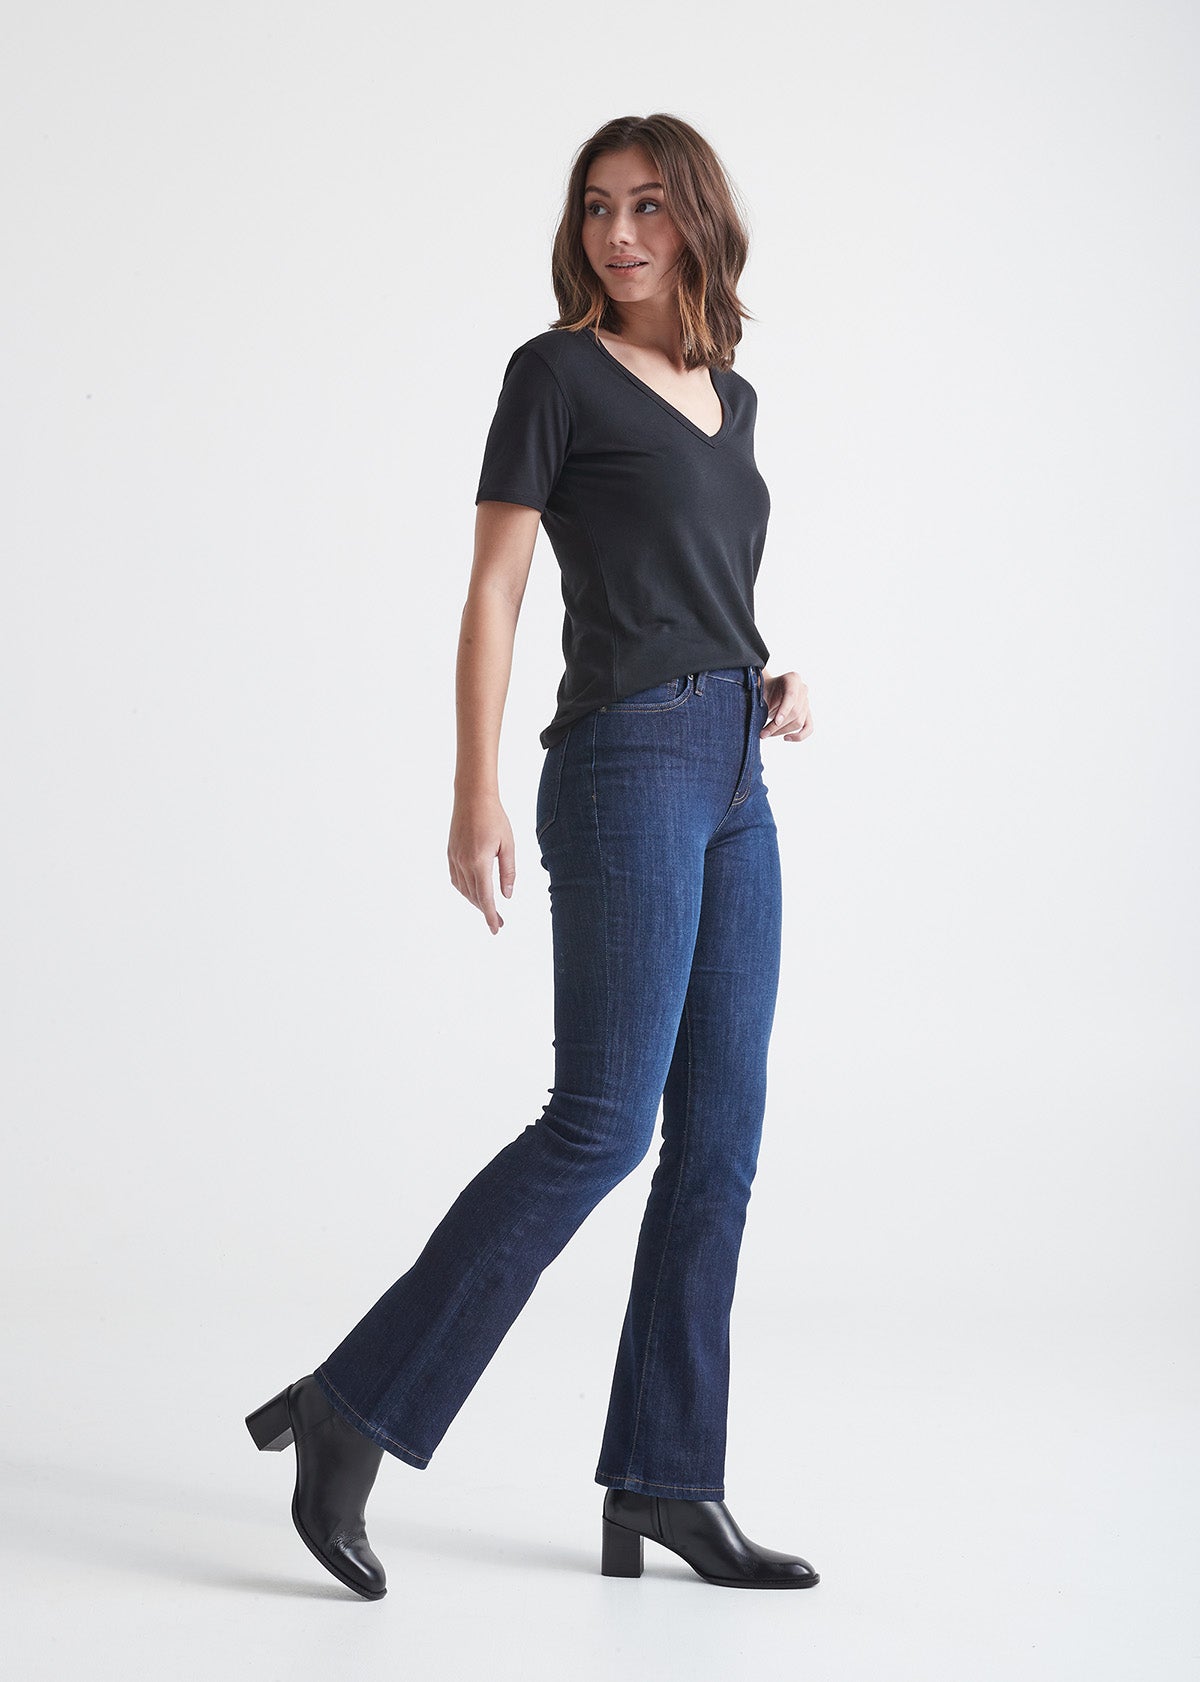 Travel Pants & Jeans for Women – Tagged waist-24